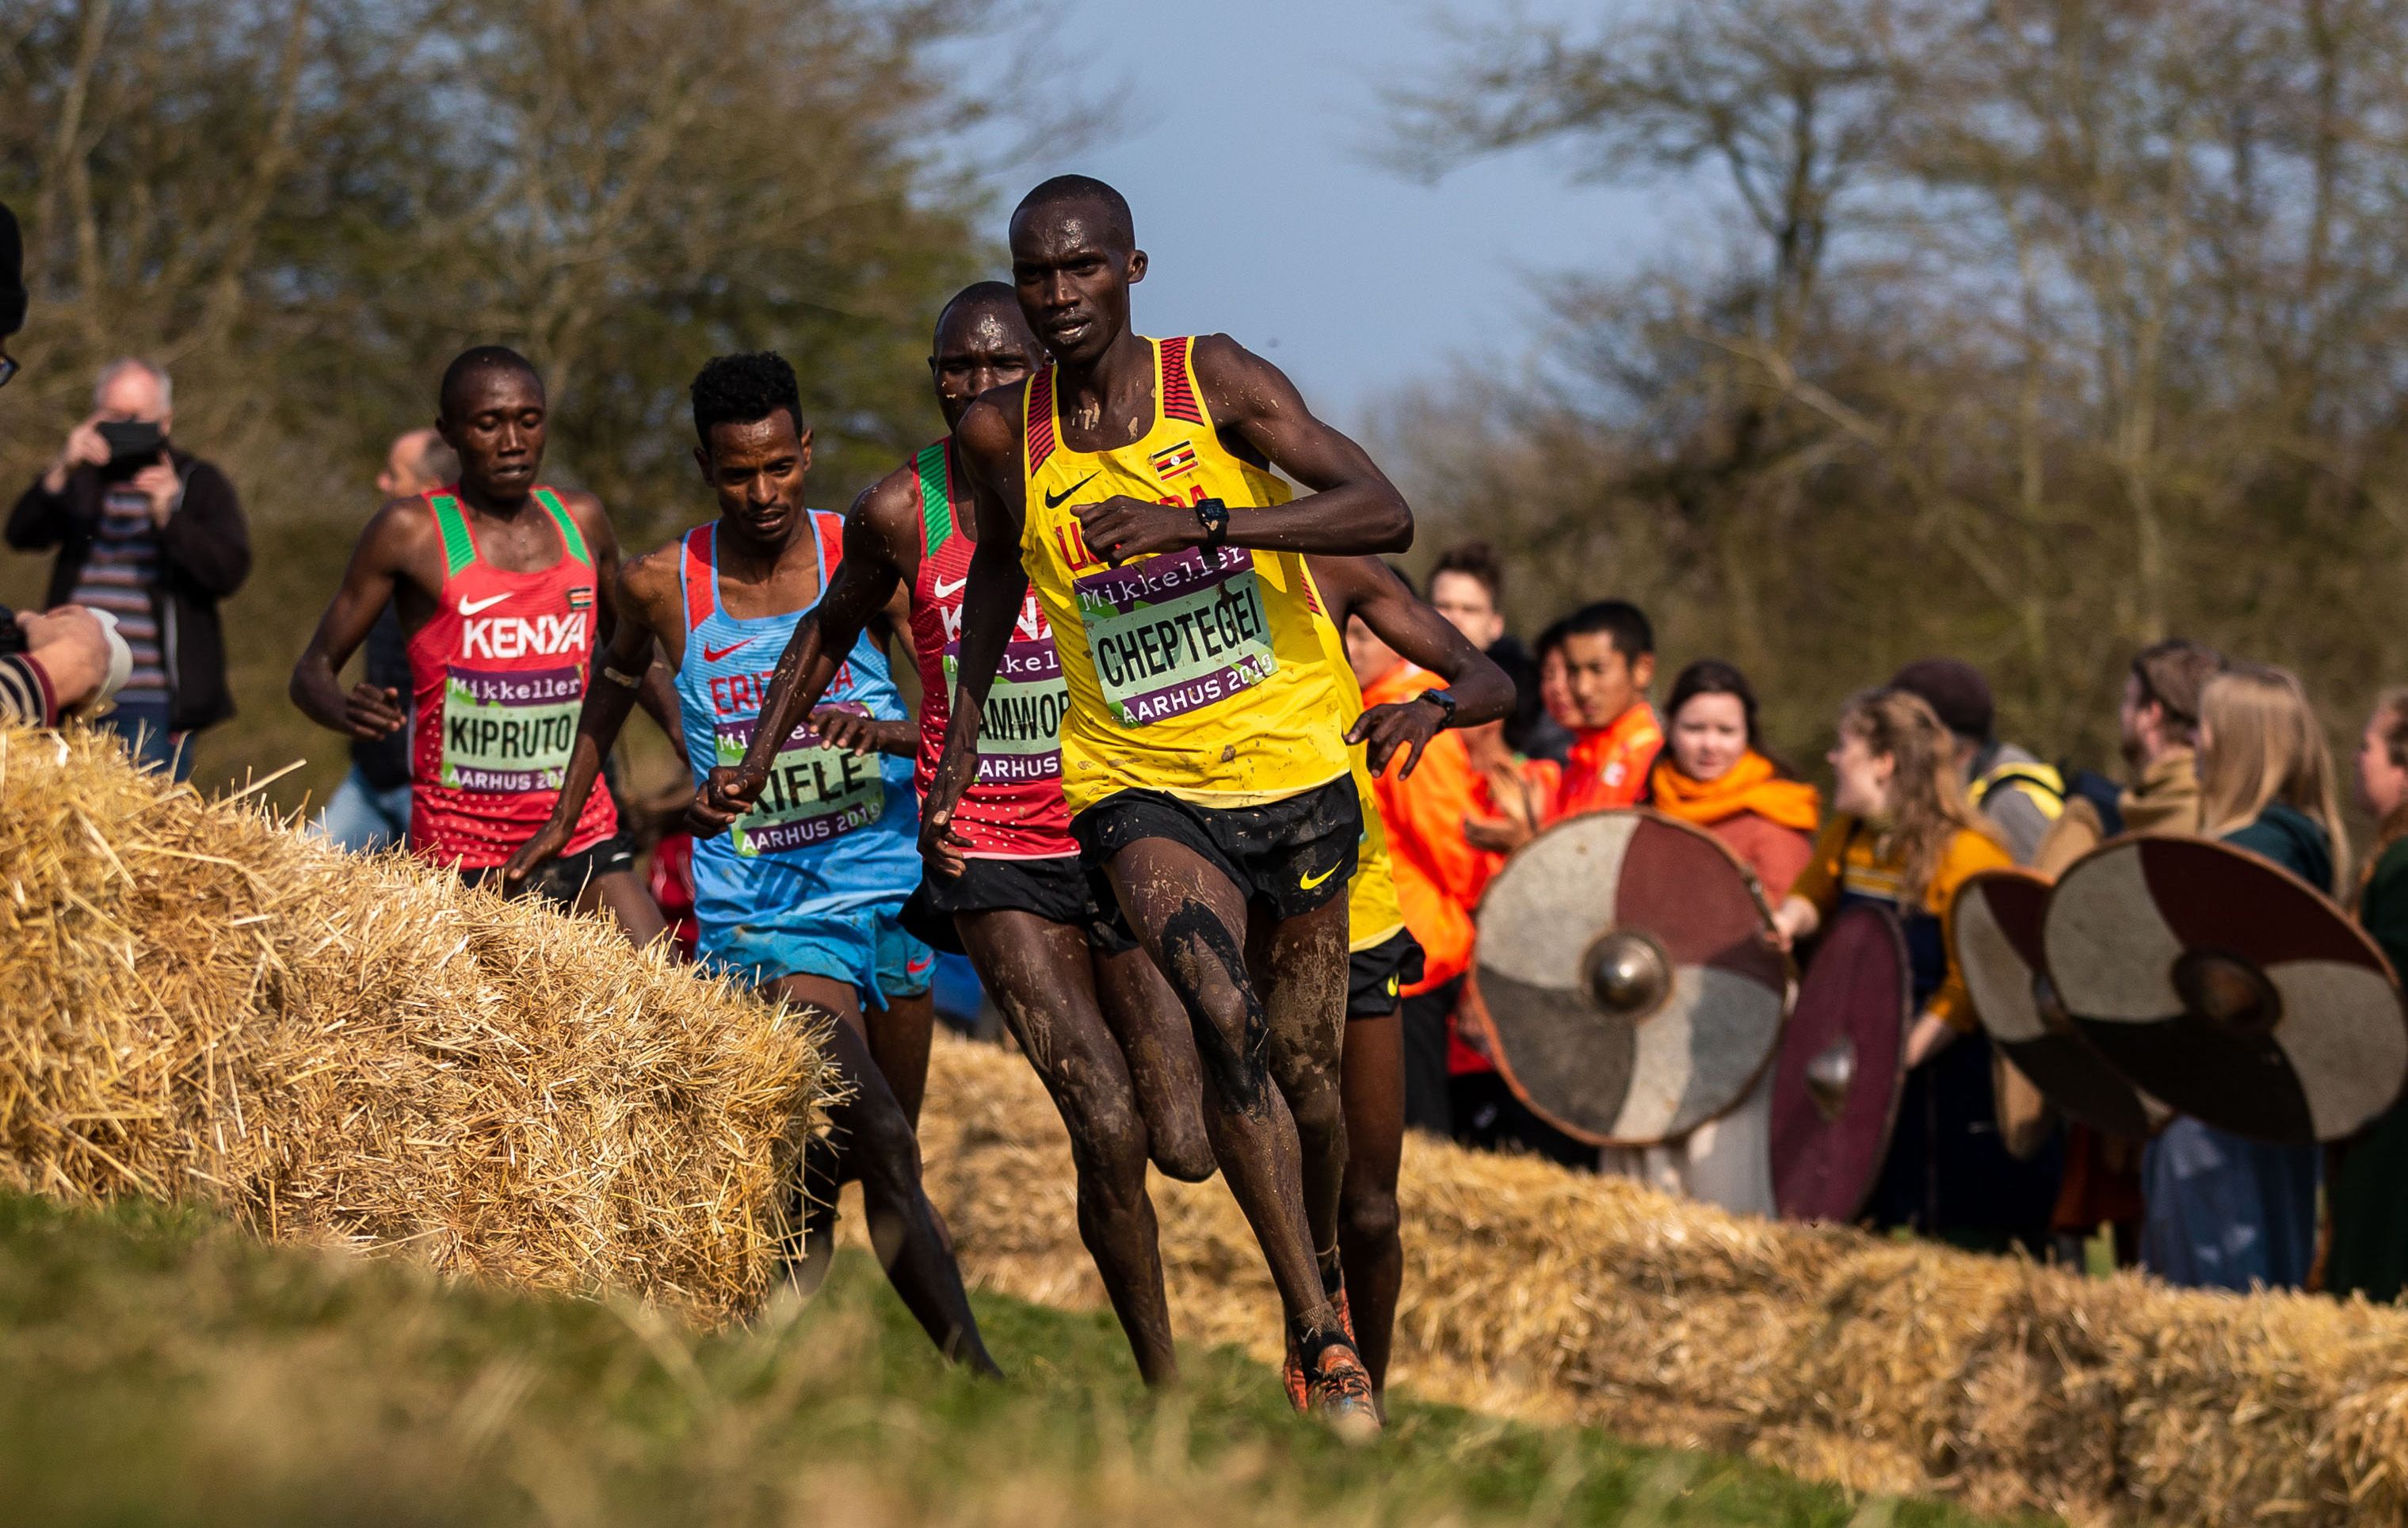 Joshua Cheptegei leads at the 2019 World Cross Country Championships in Aarhus